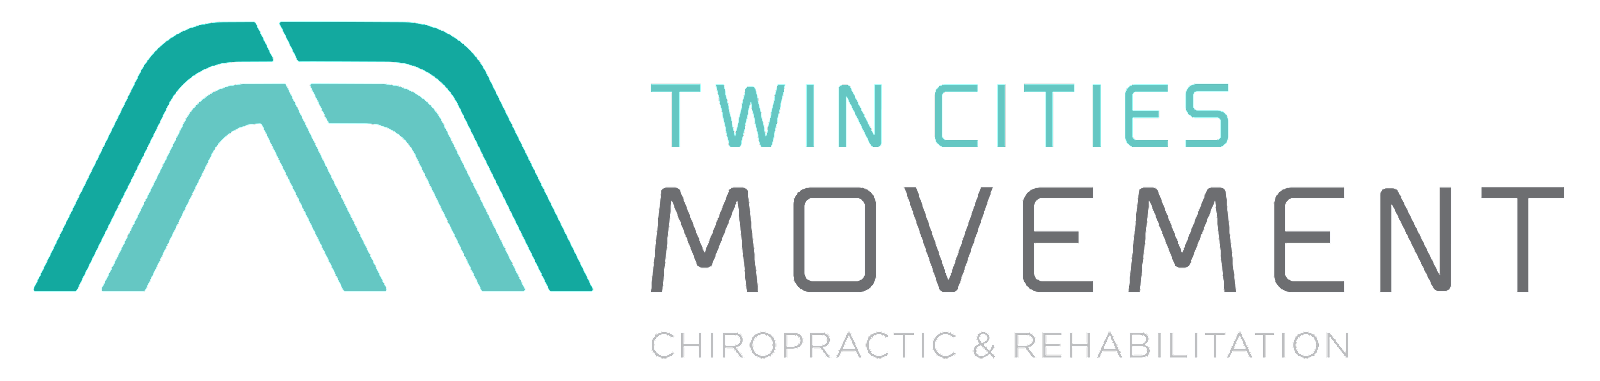 Twin Cities Movement: chiropractic and rehabilitation